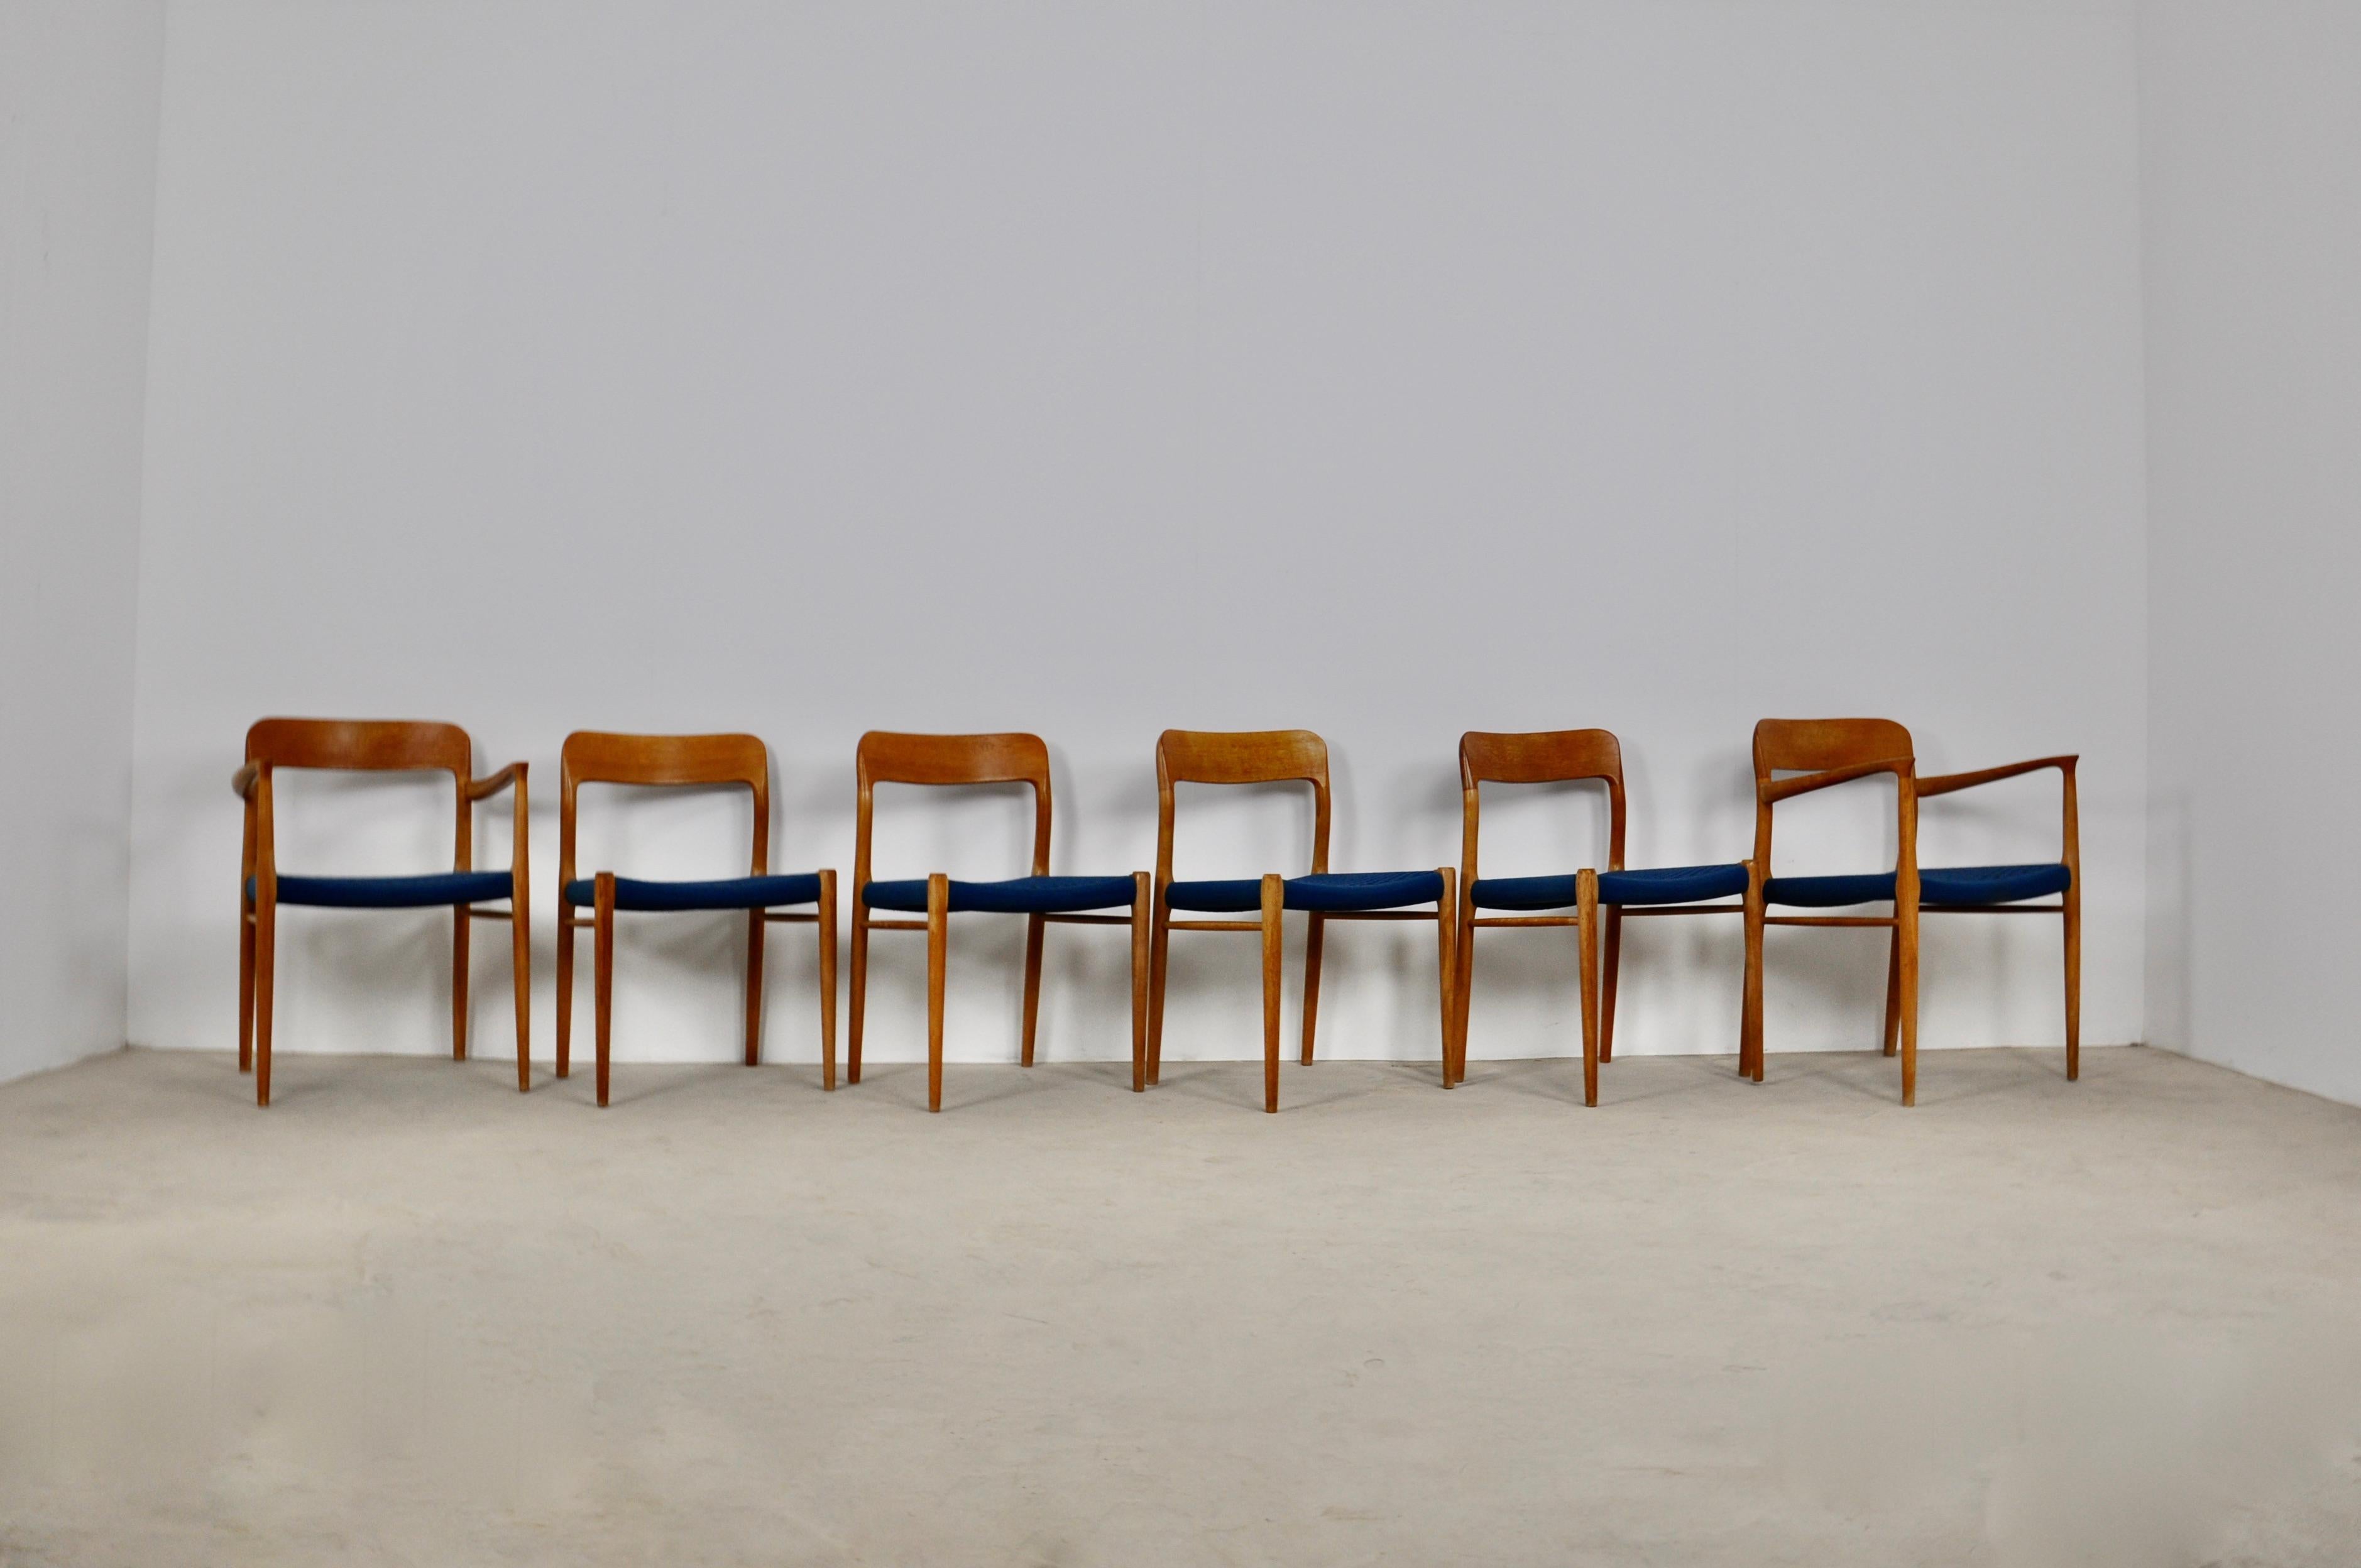 Set of 6 wooden chairs and blue rope. Wear and tear due to time and the age of the chairs. Small wear and tear on the seat (very minimal see photo)
Armchair dimensions: H 76 cm, W 57 cm, D 52 cm
Seat height 45cm.